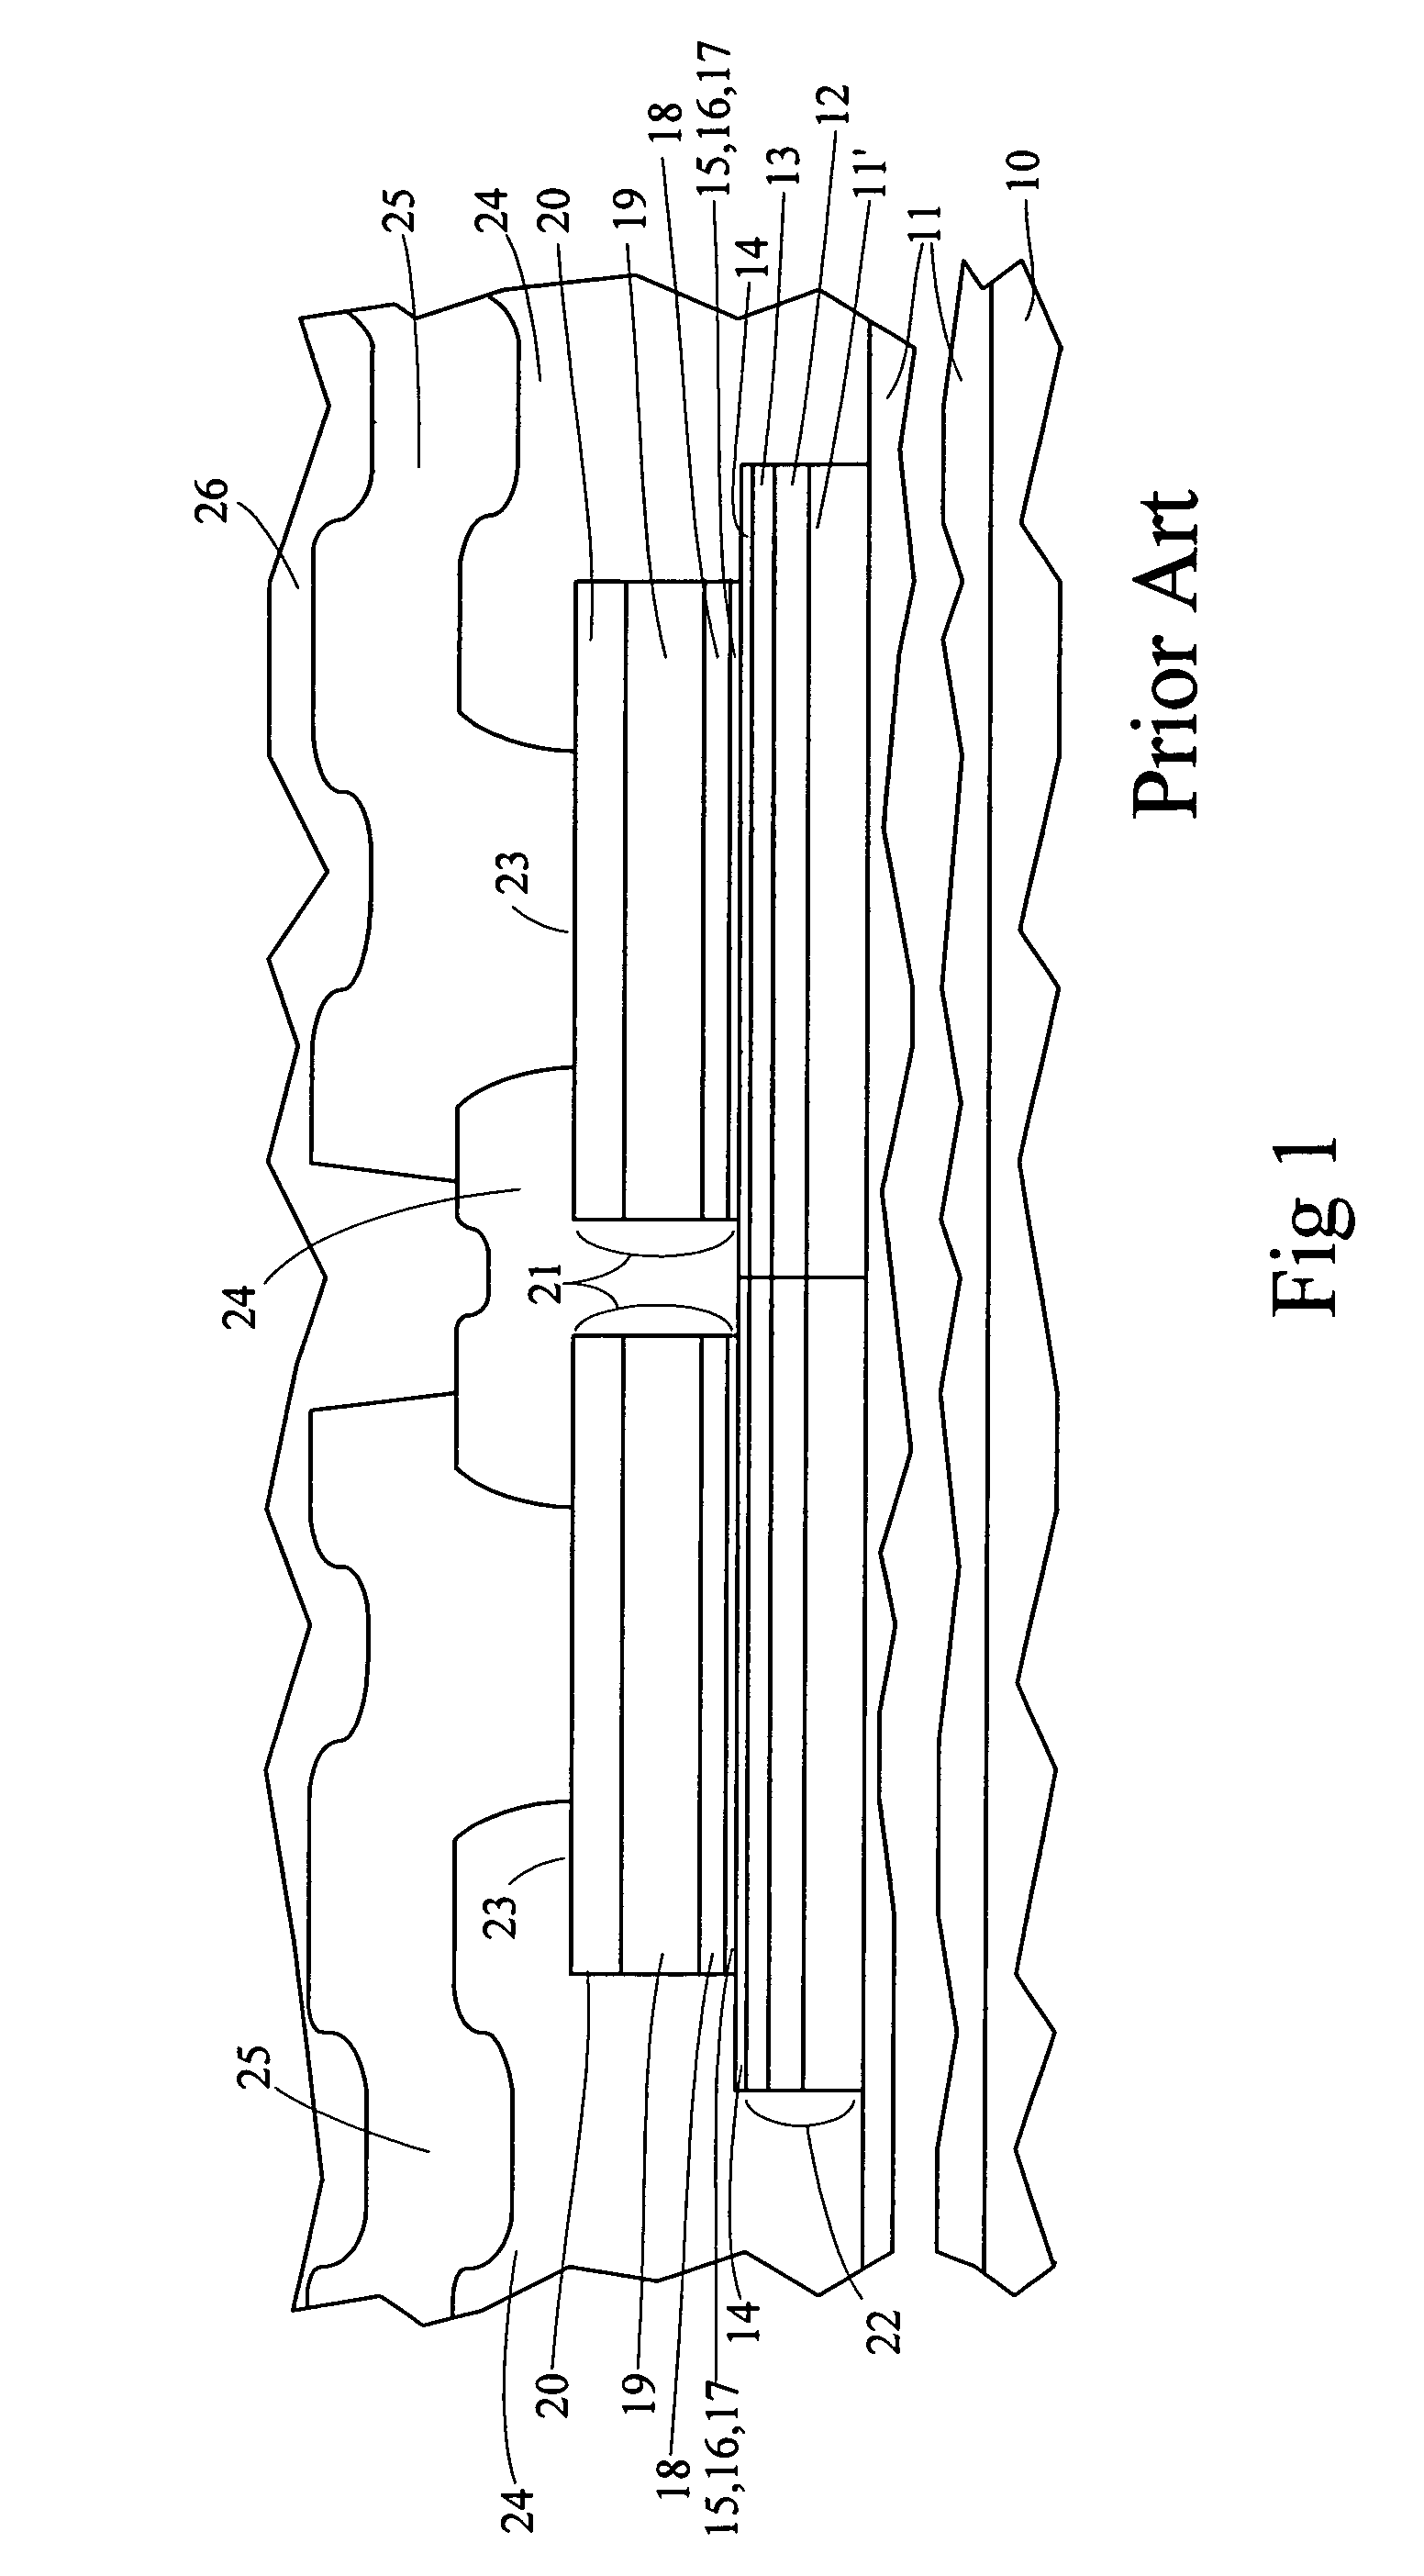 Spin dependent tunneling devices having reduced topological coupling